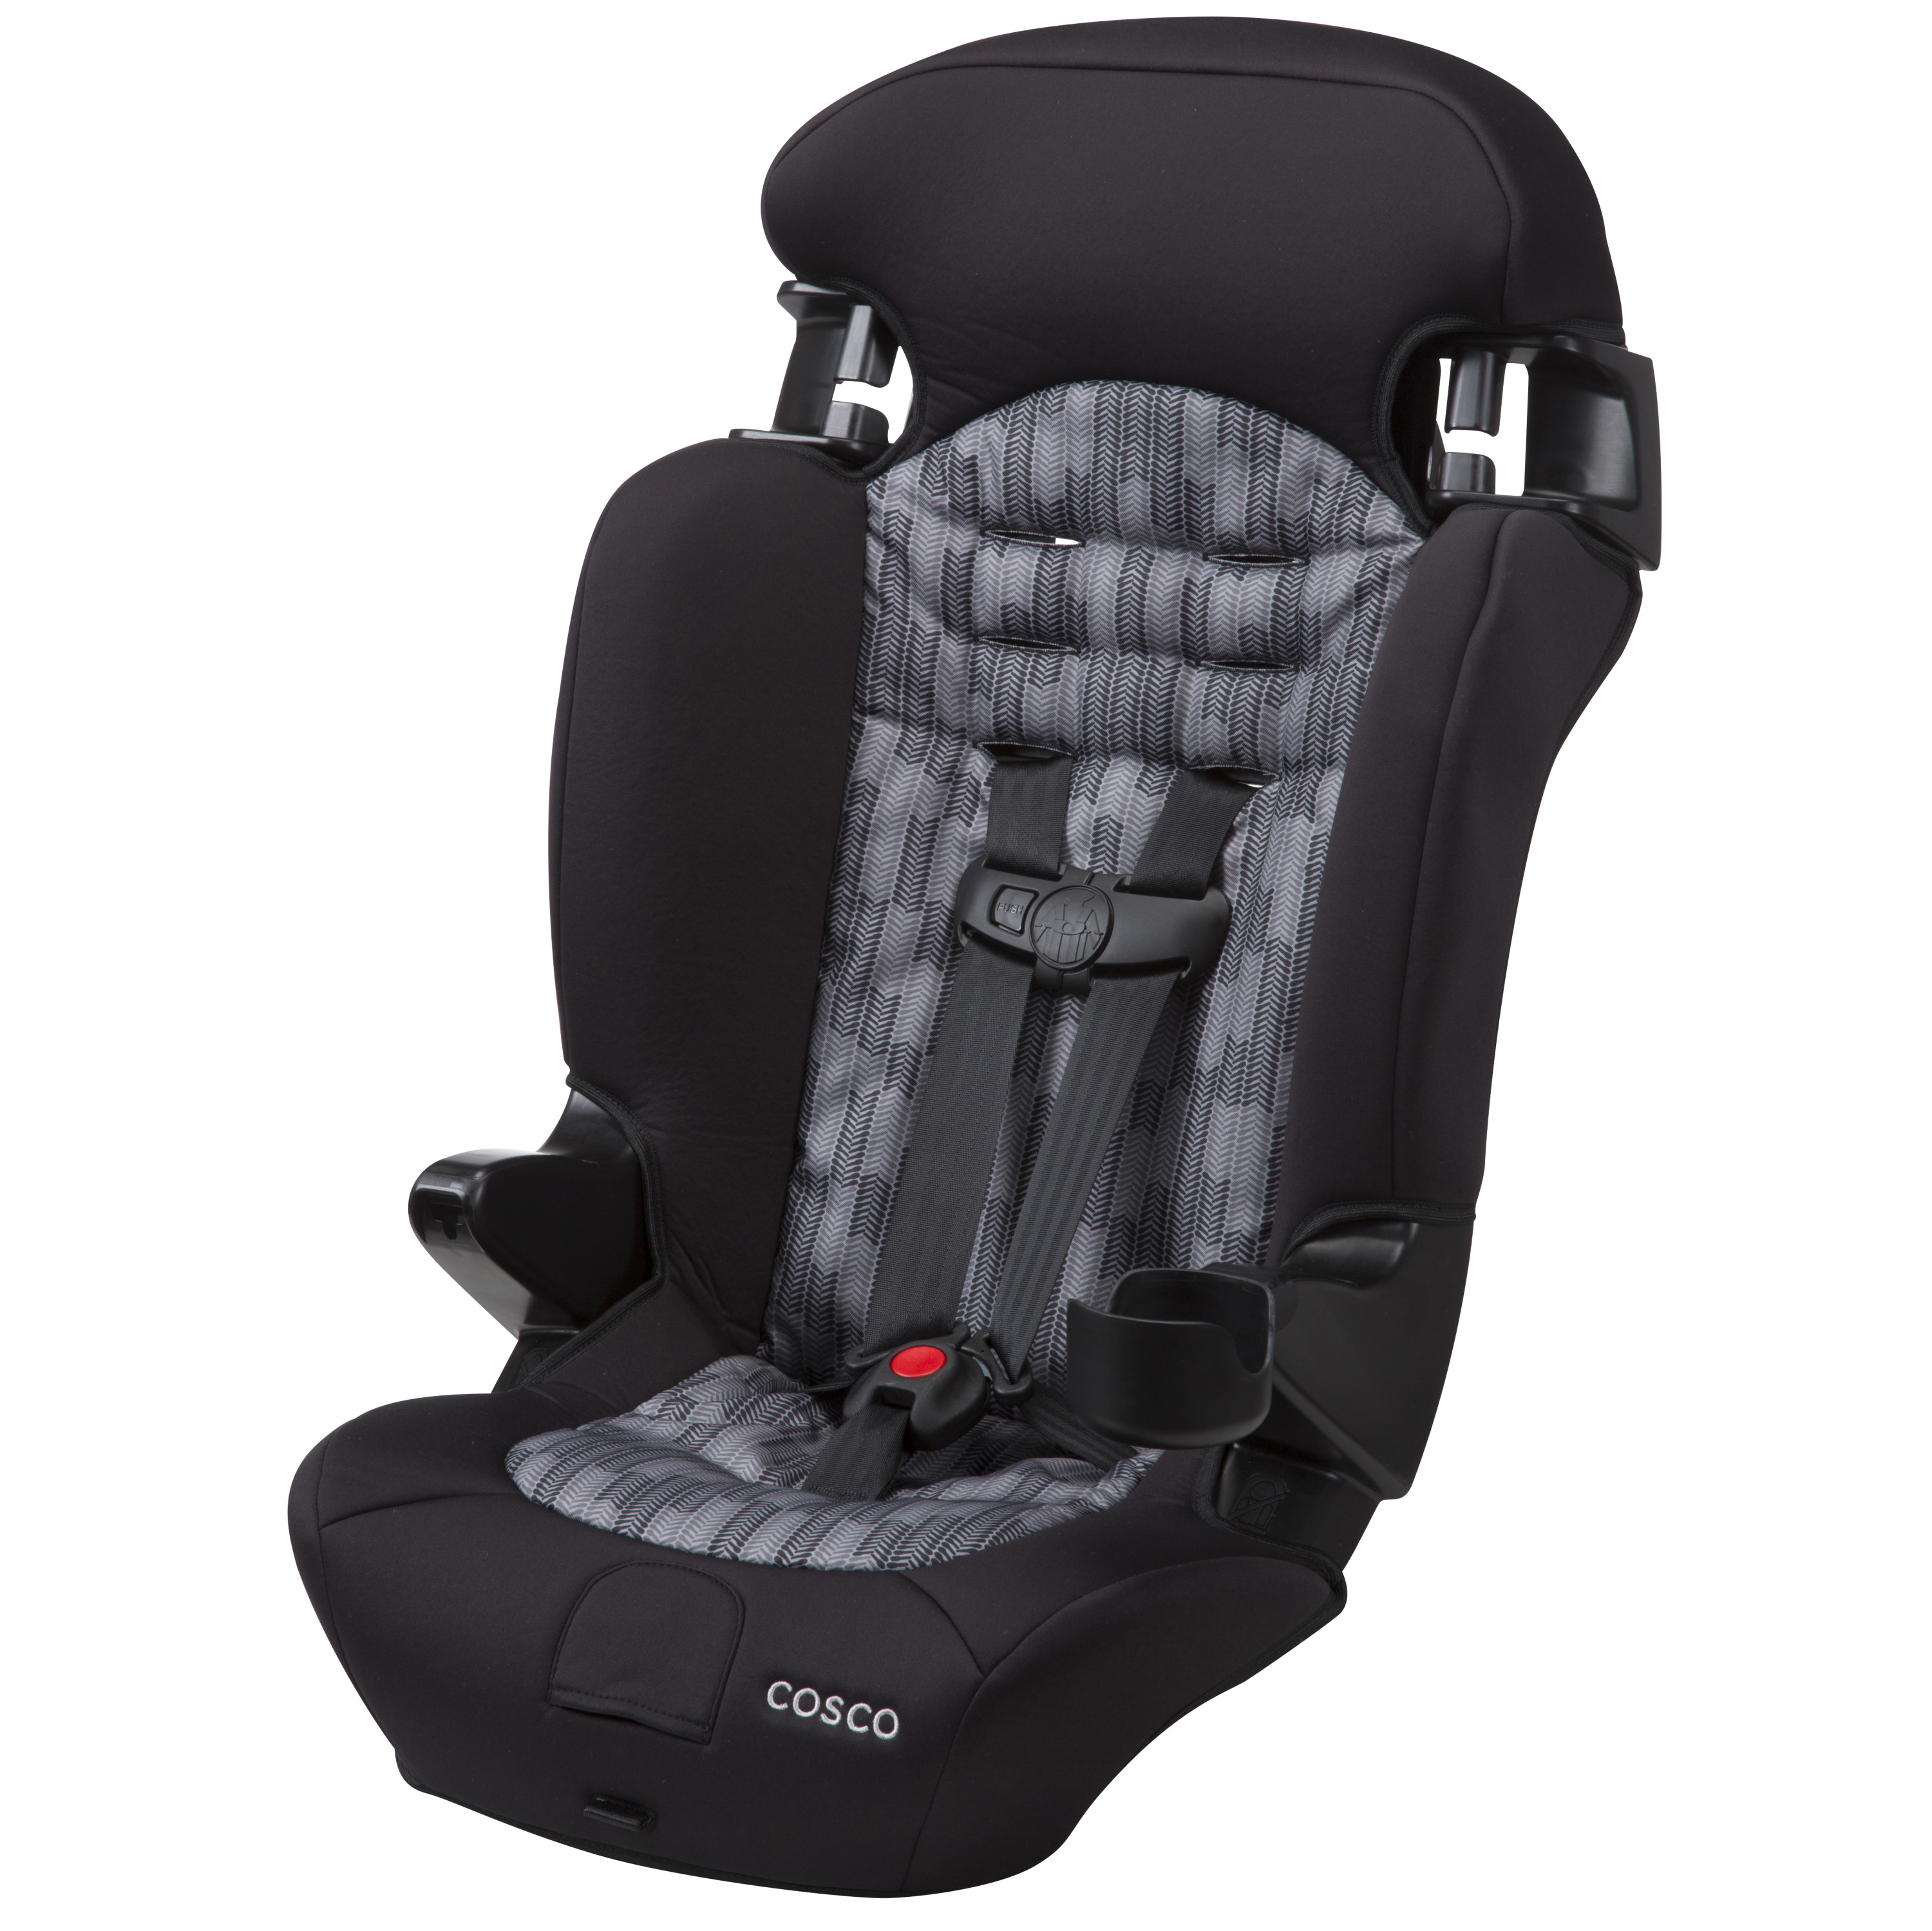 Cosco Finale 2-in-1 Booster Car Seat, Flight - image 1 of 17